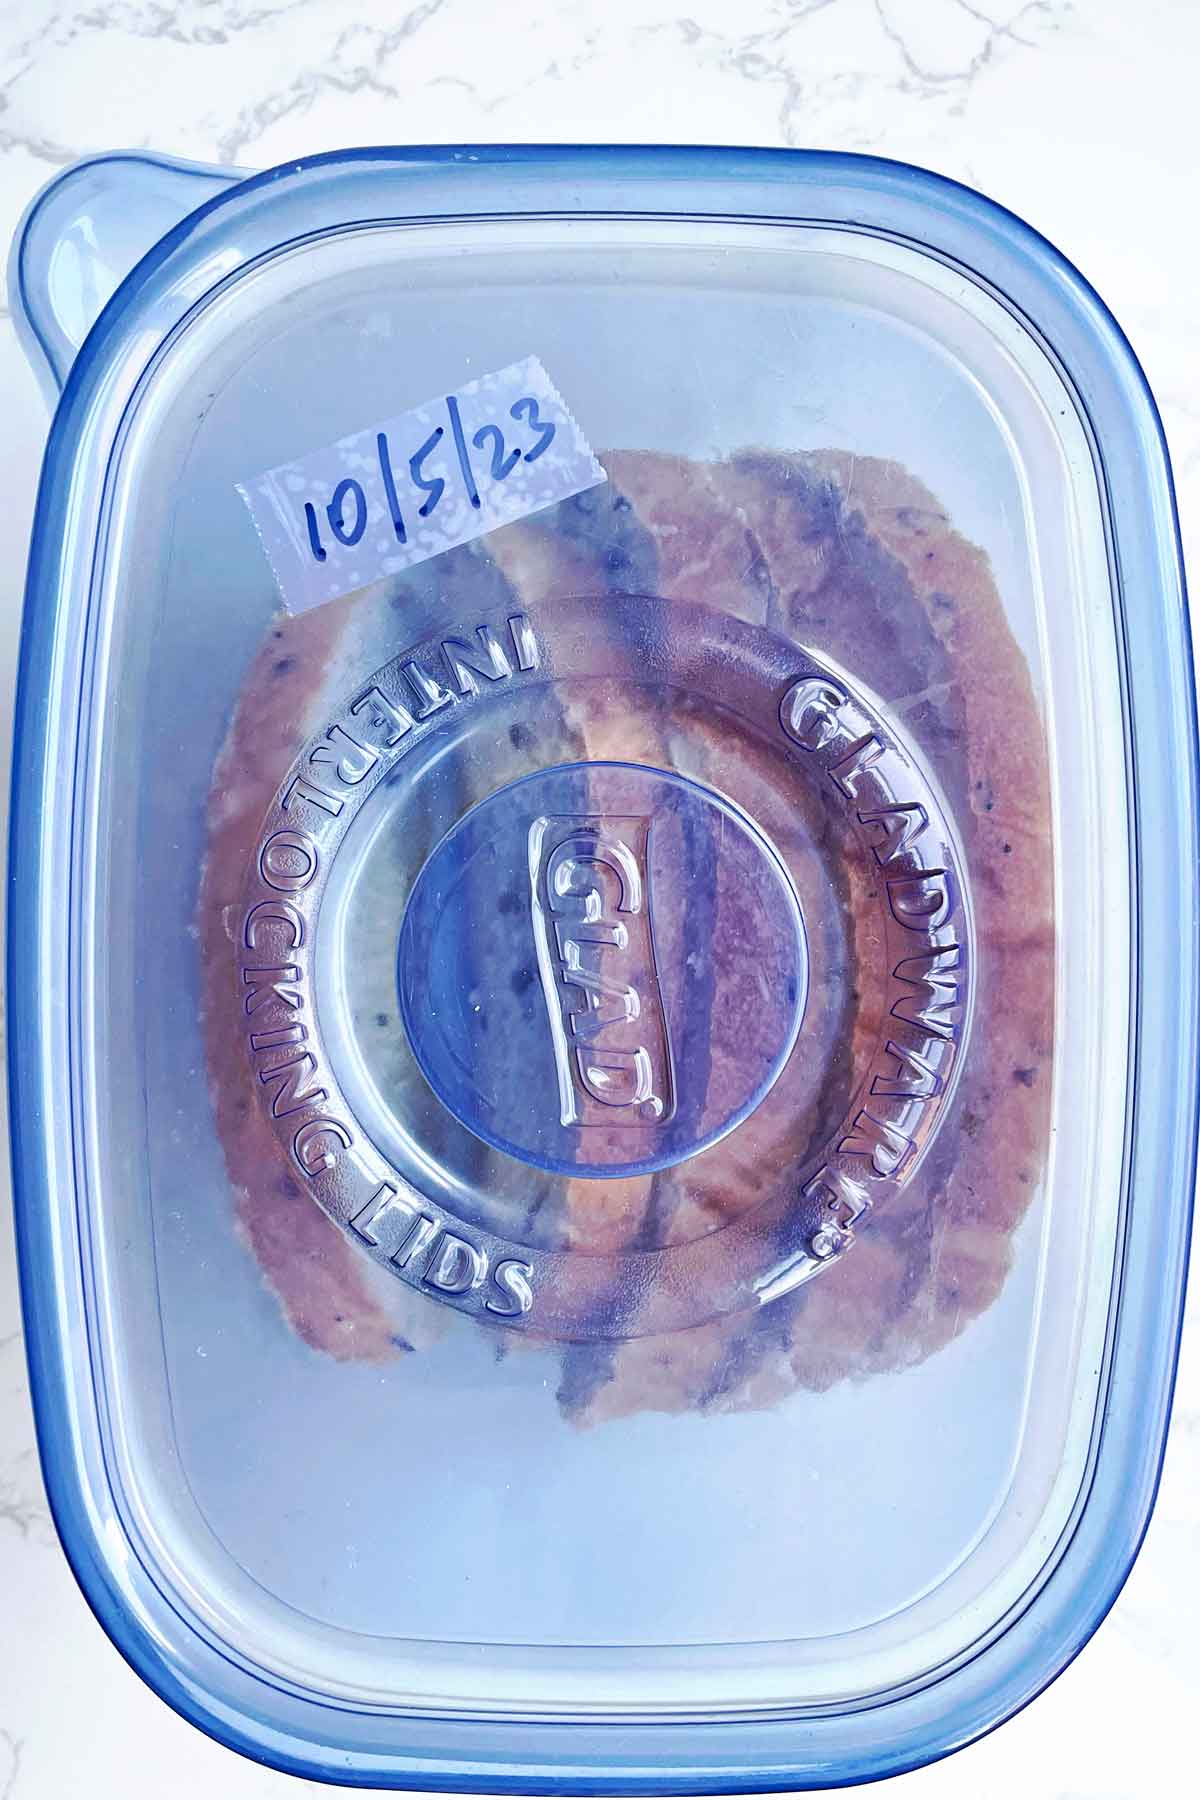 bread slices in freezer safe container.